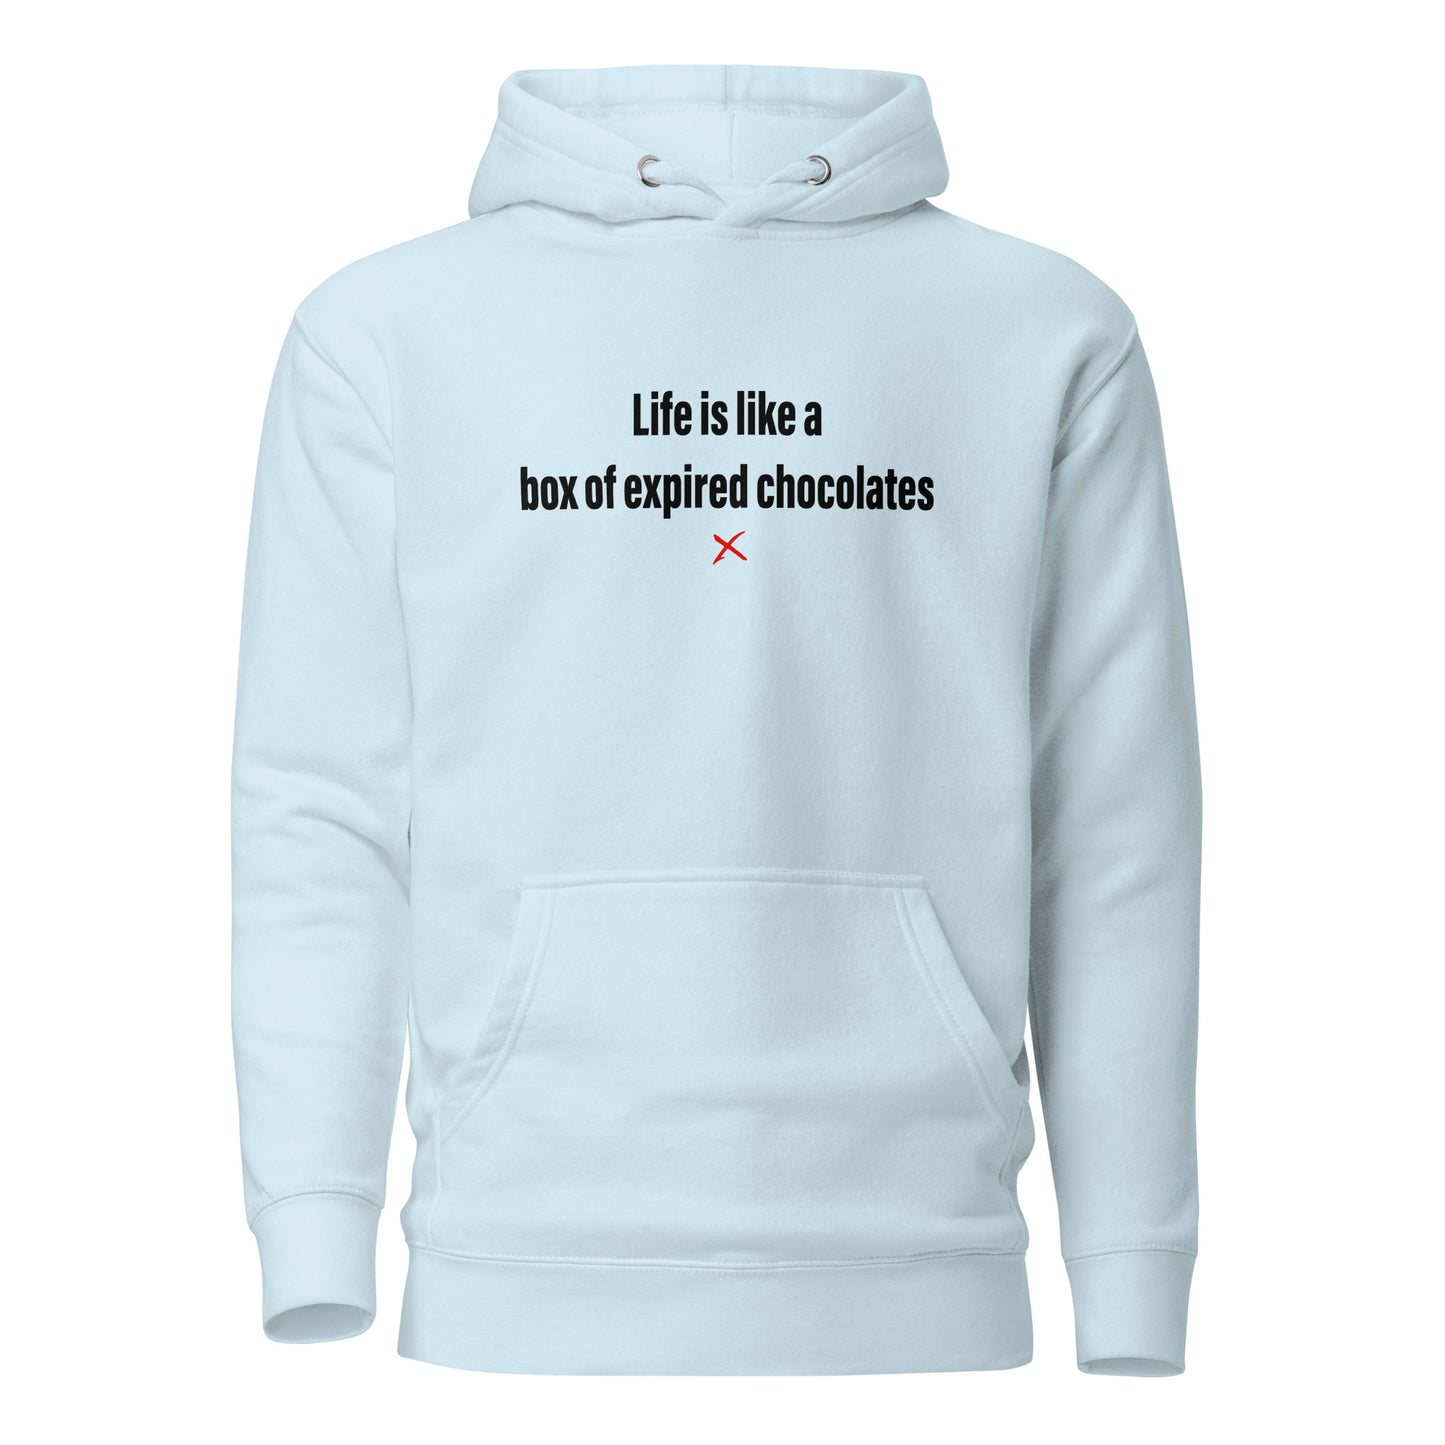 Life is like a box of expired chocolates - Hoodie